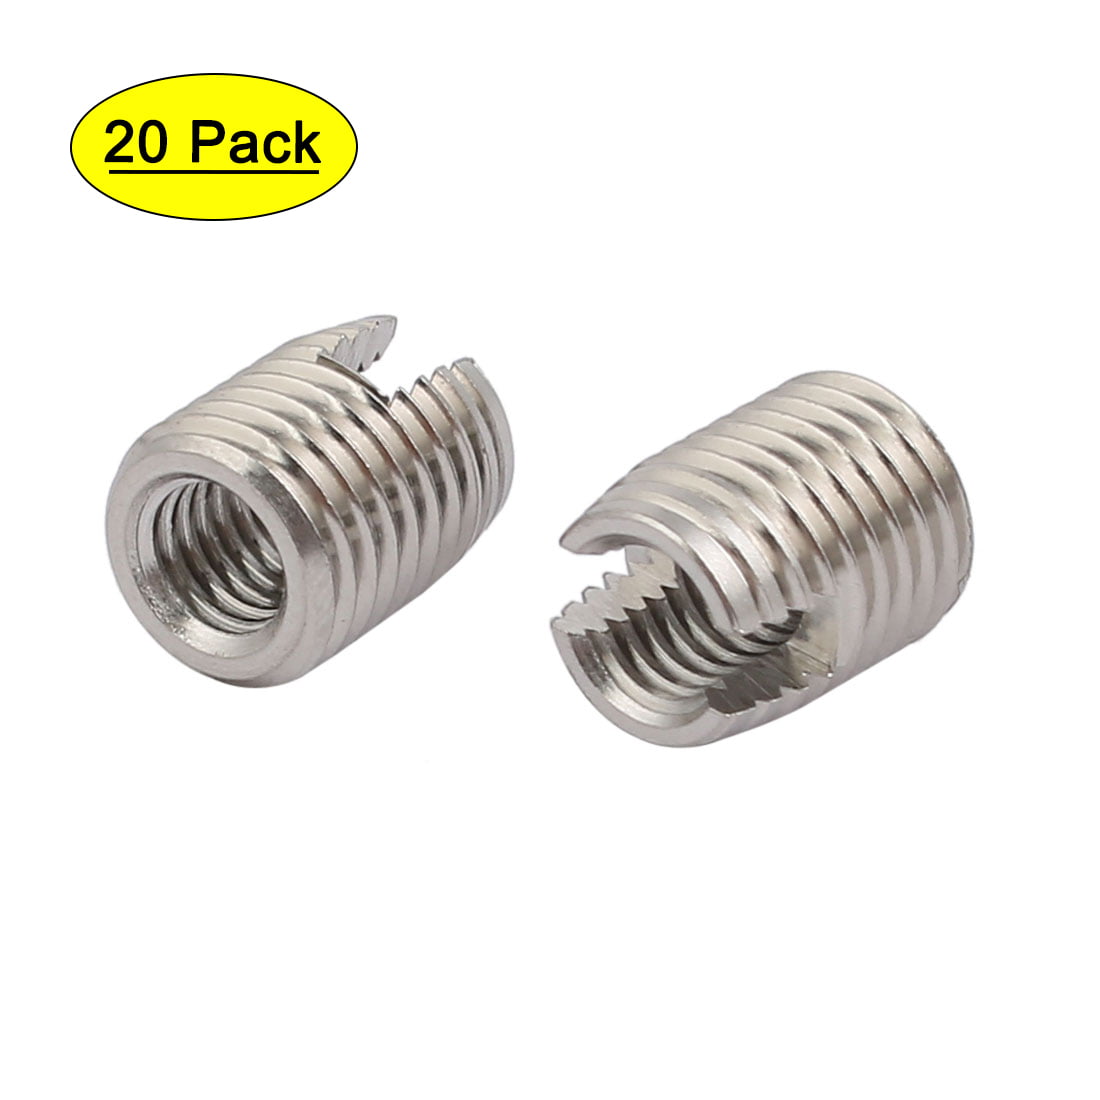 M5x10mm 304 Stainless Steel Self Tapping Slotted Thread Insert 20pcs 